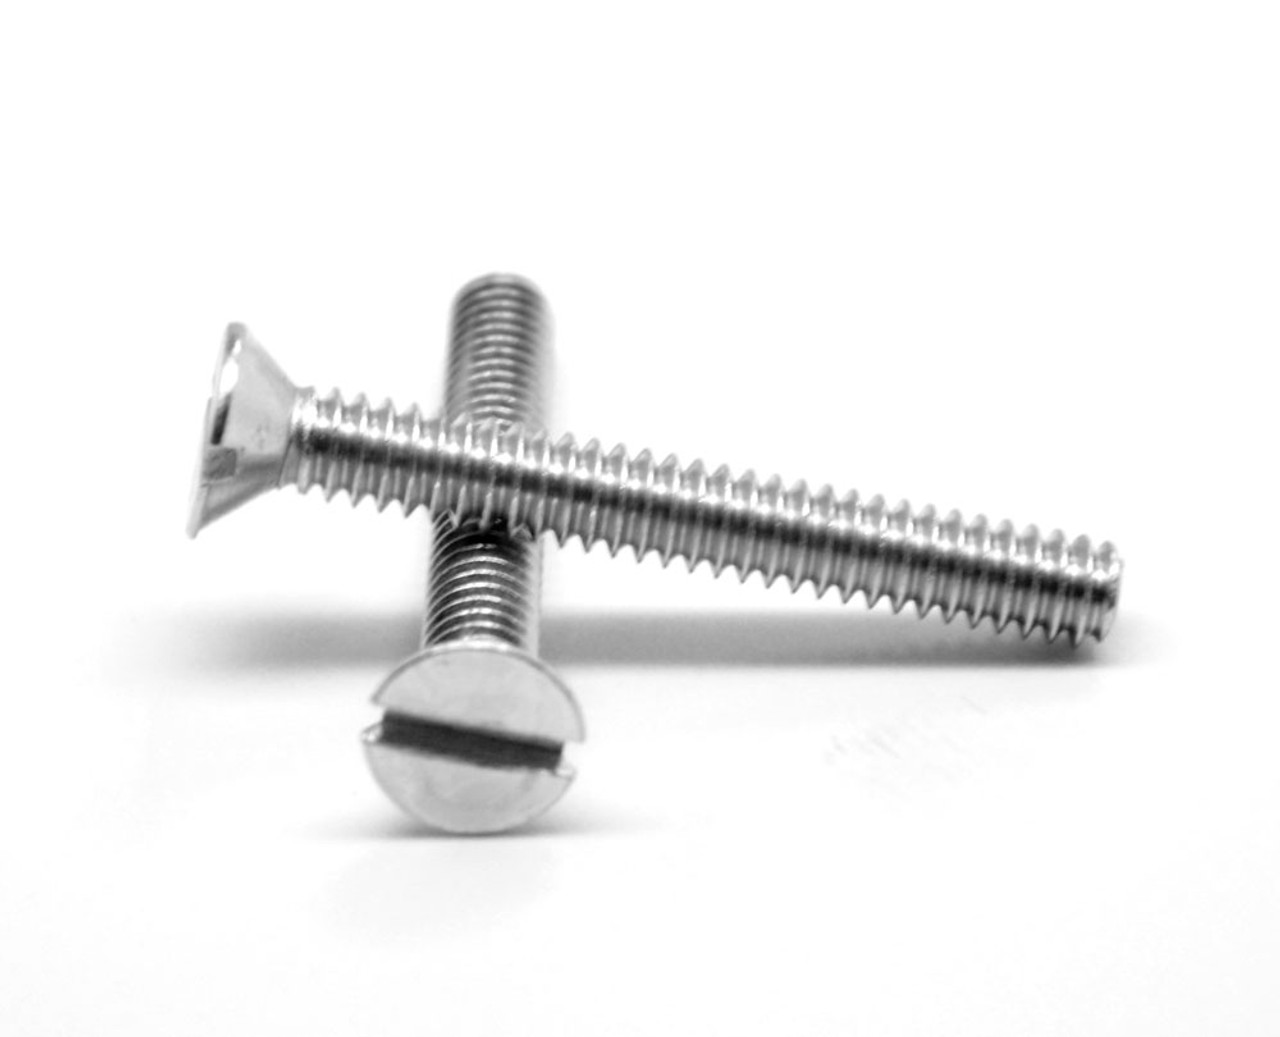 #10-24 x 2 1/4" (FT) Coarse Thread Machine Screw Slotted Flat Head Stainless Steel 18-8